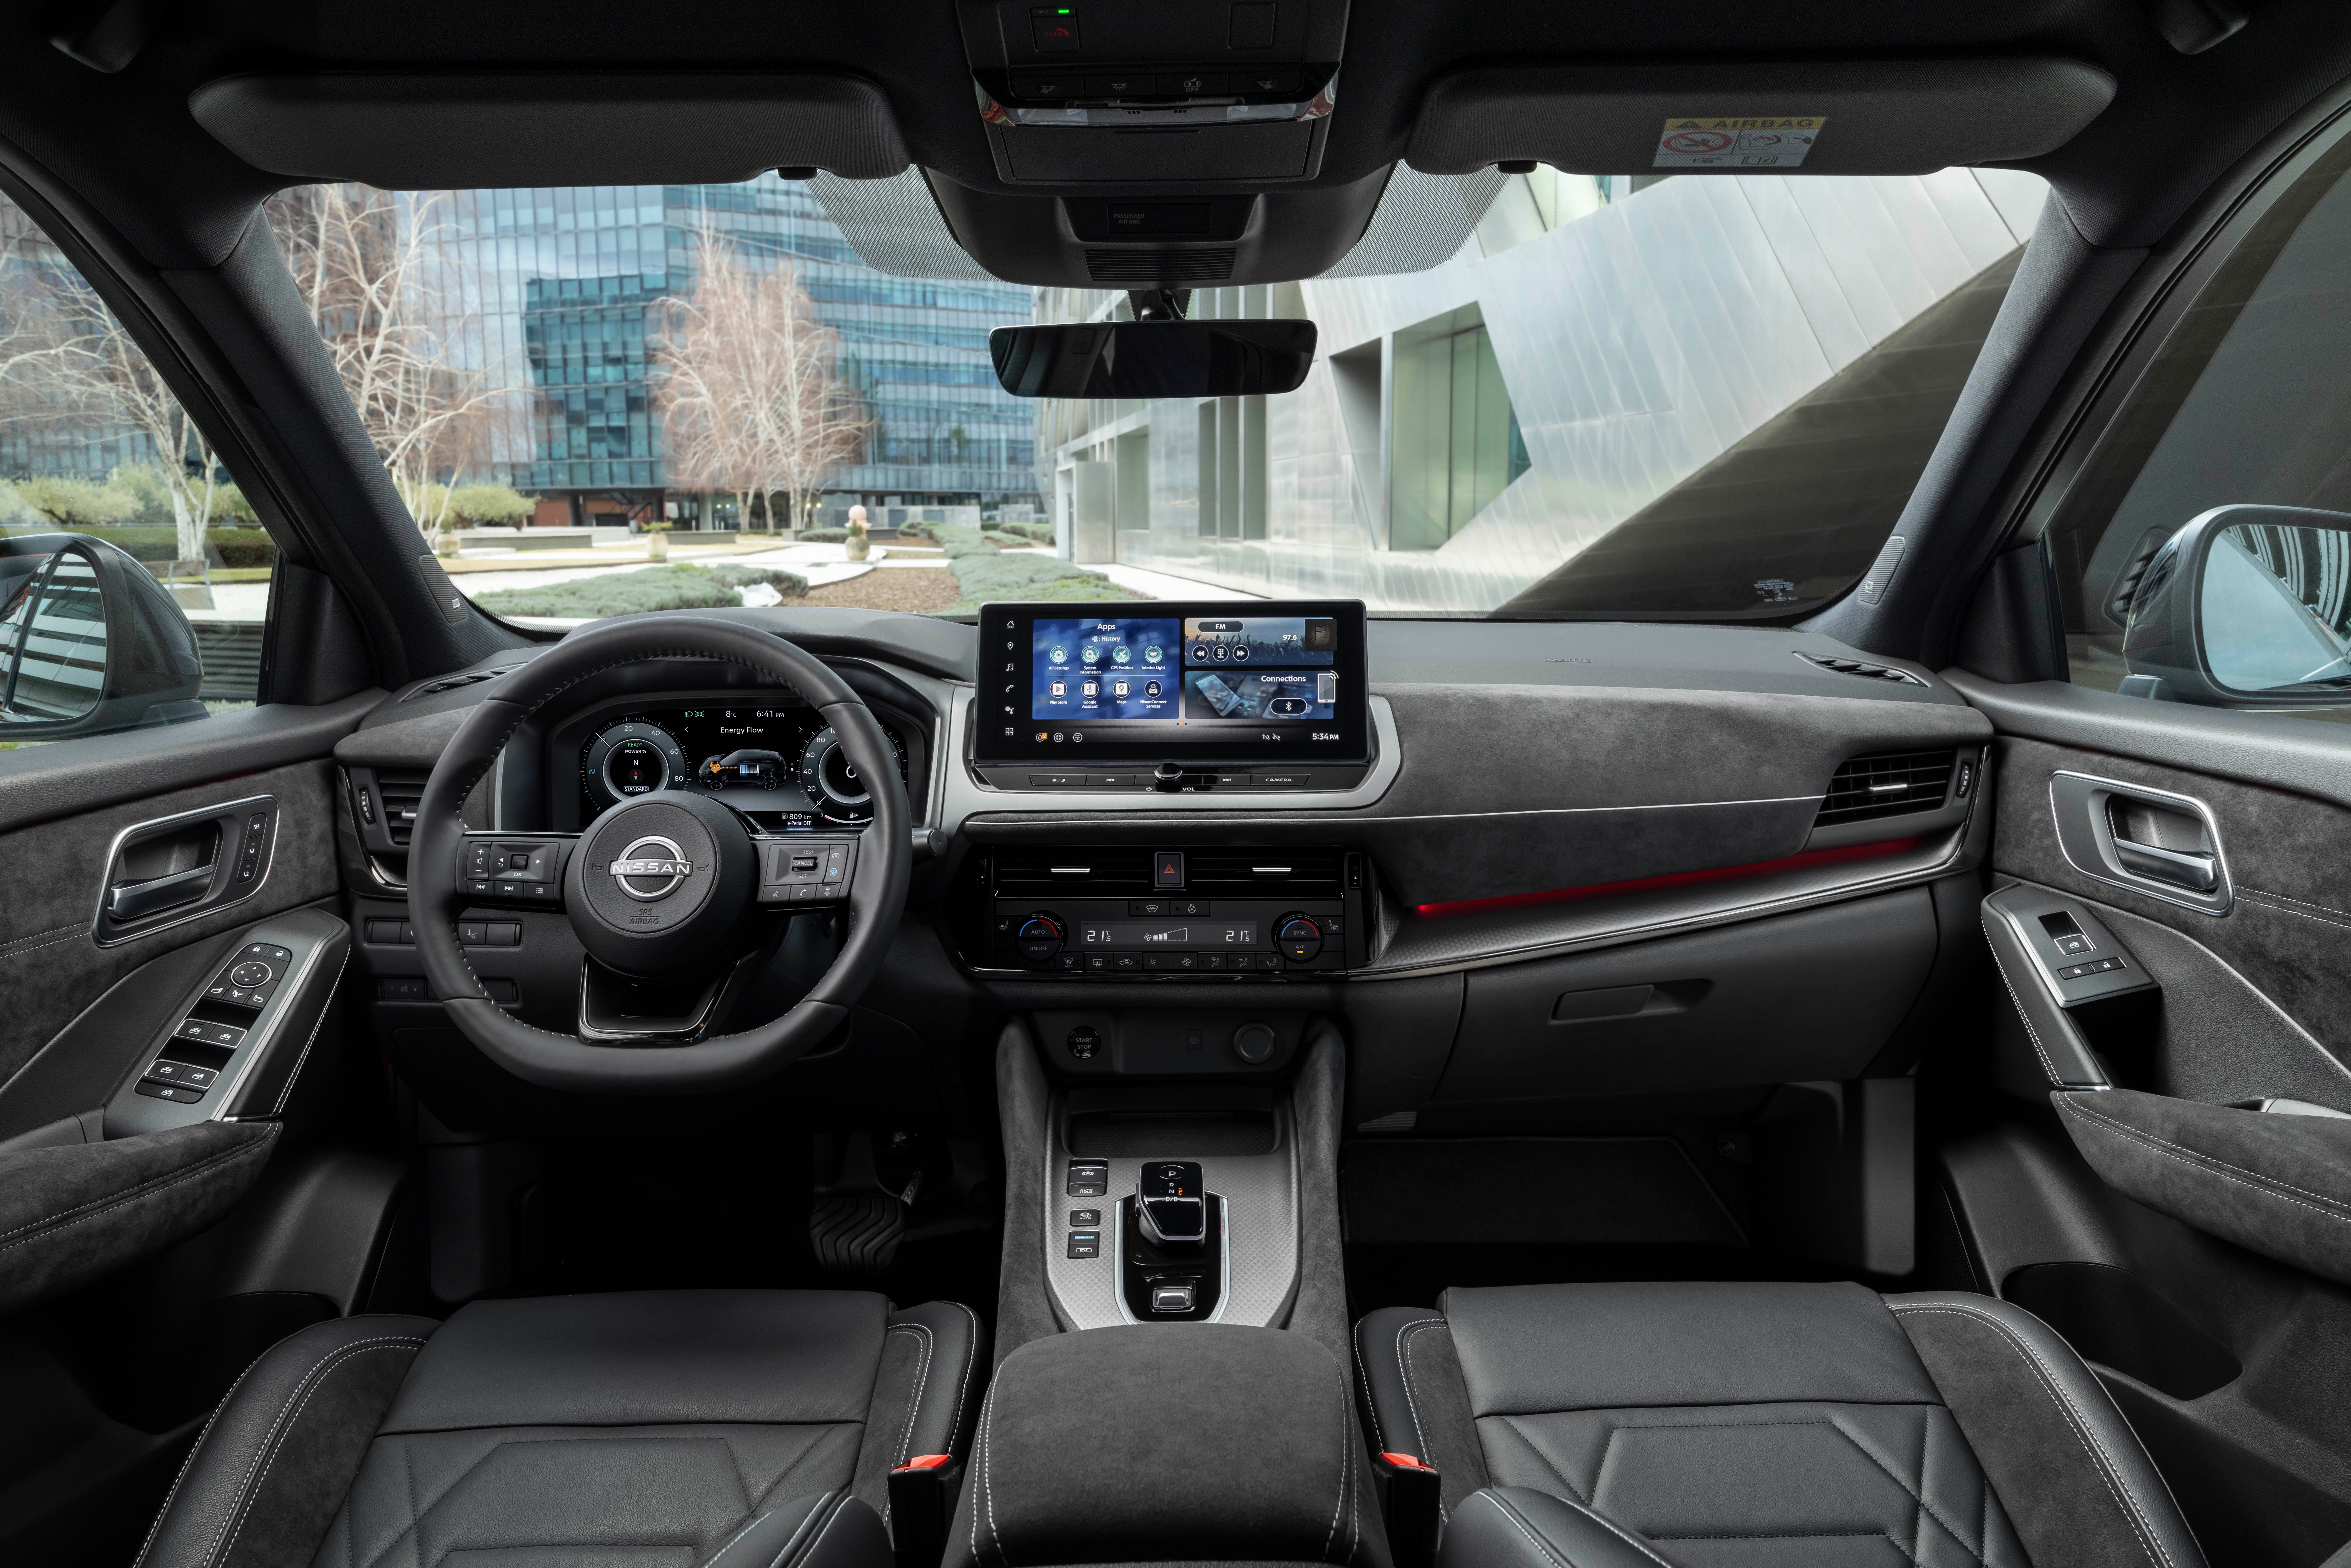 The driver's spatial awareness is enhanced by 360-degree eight-point color cameras.